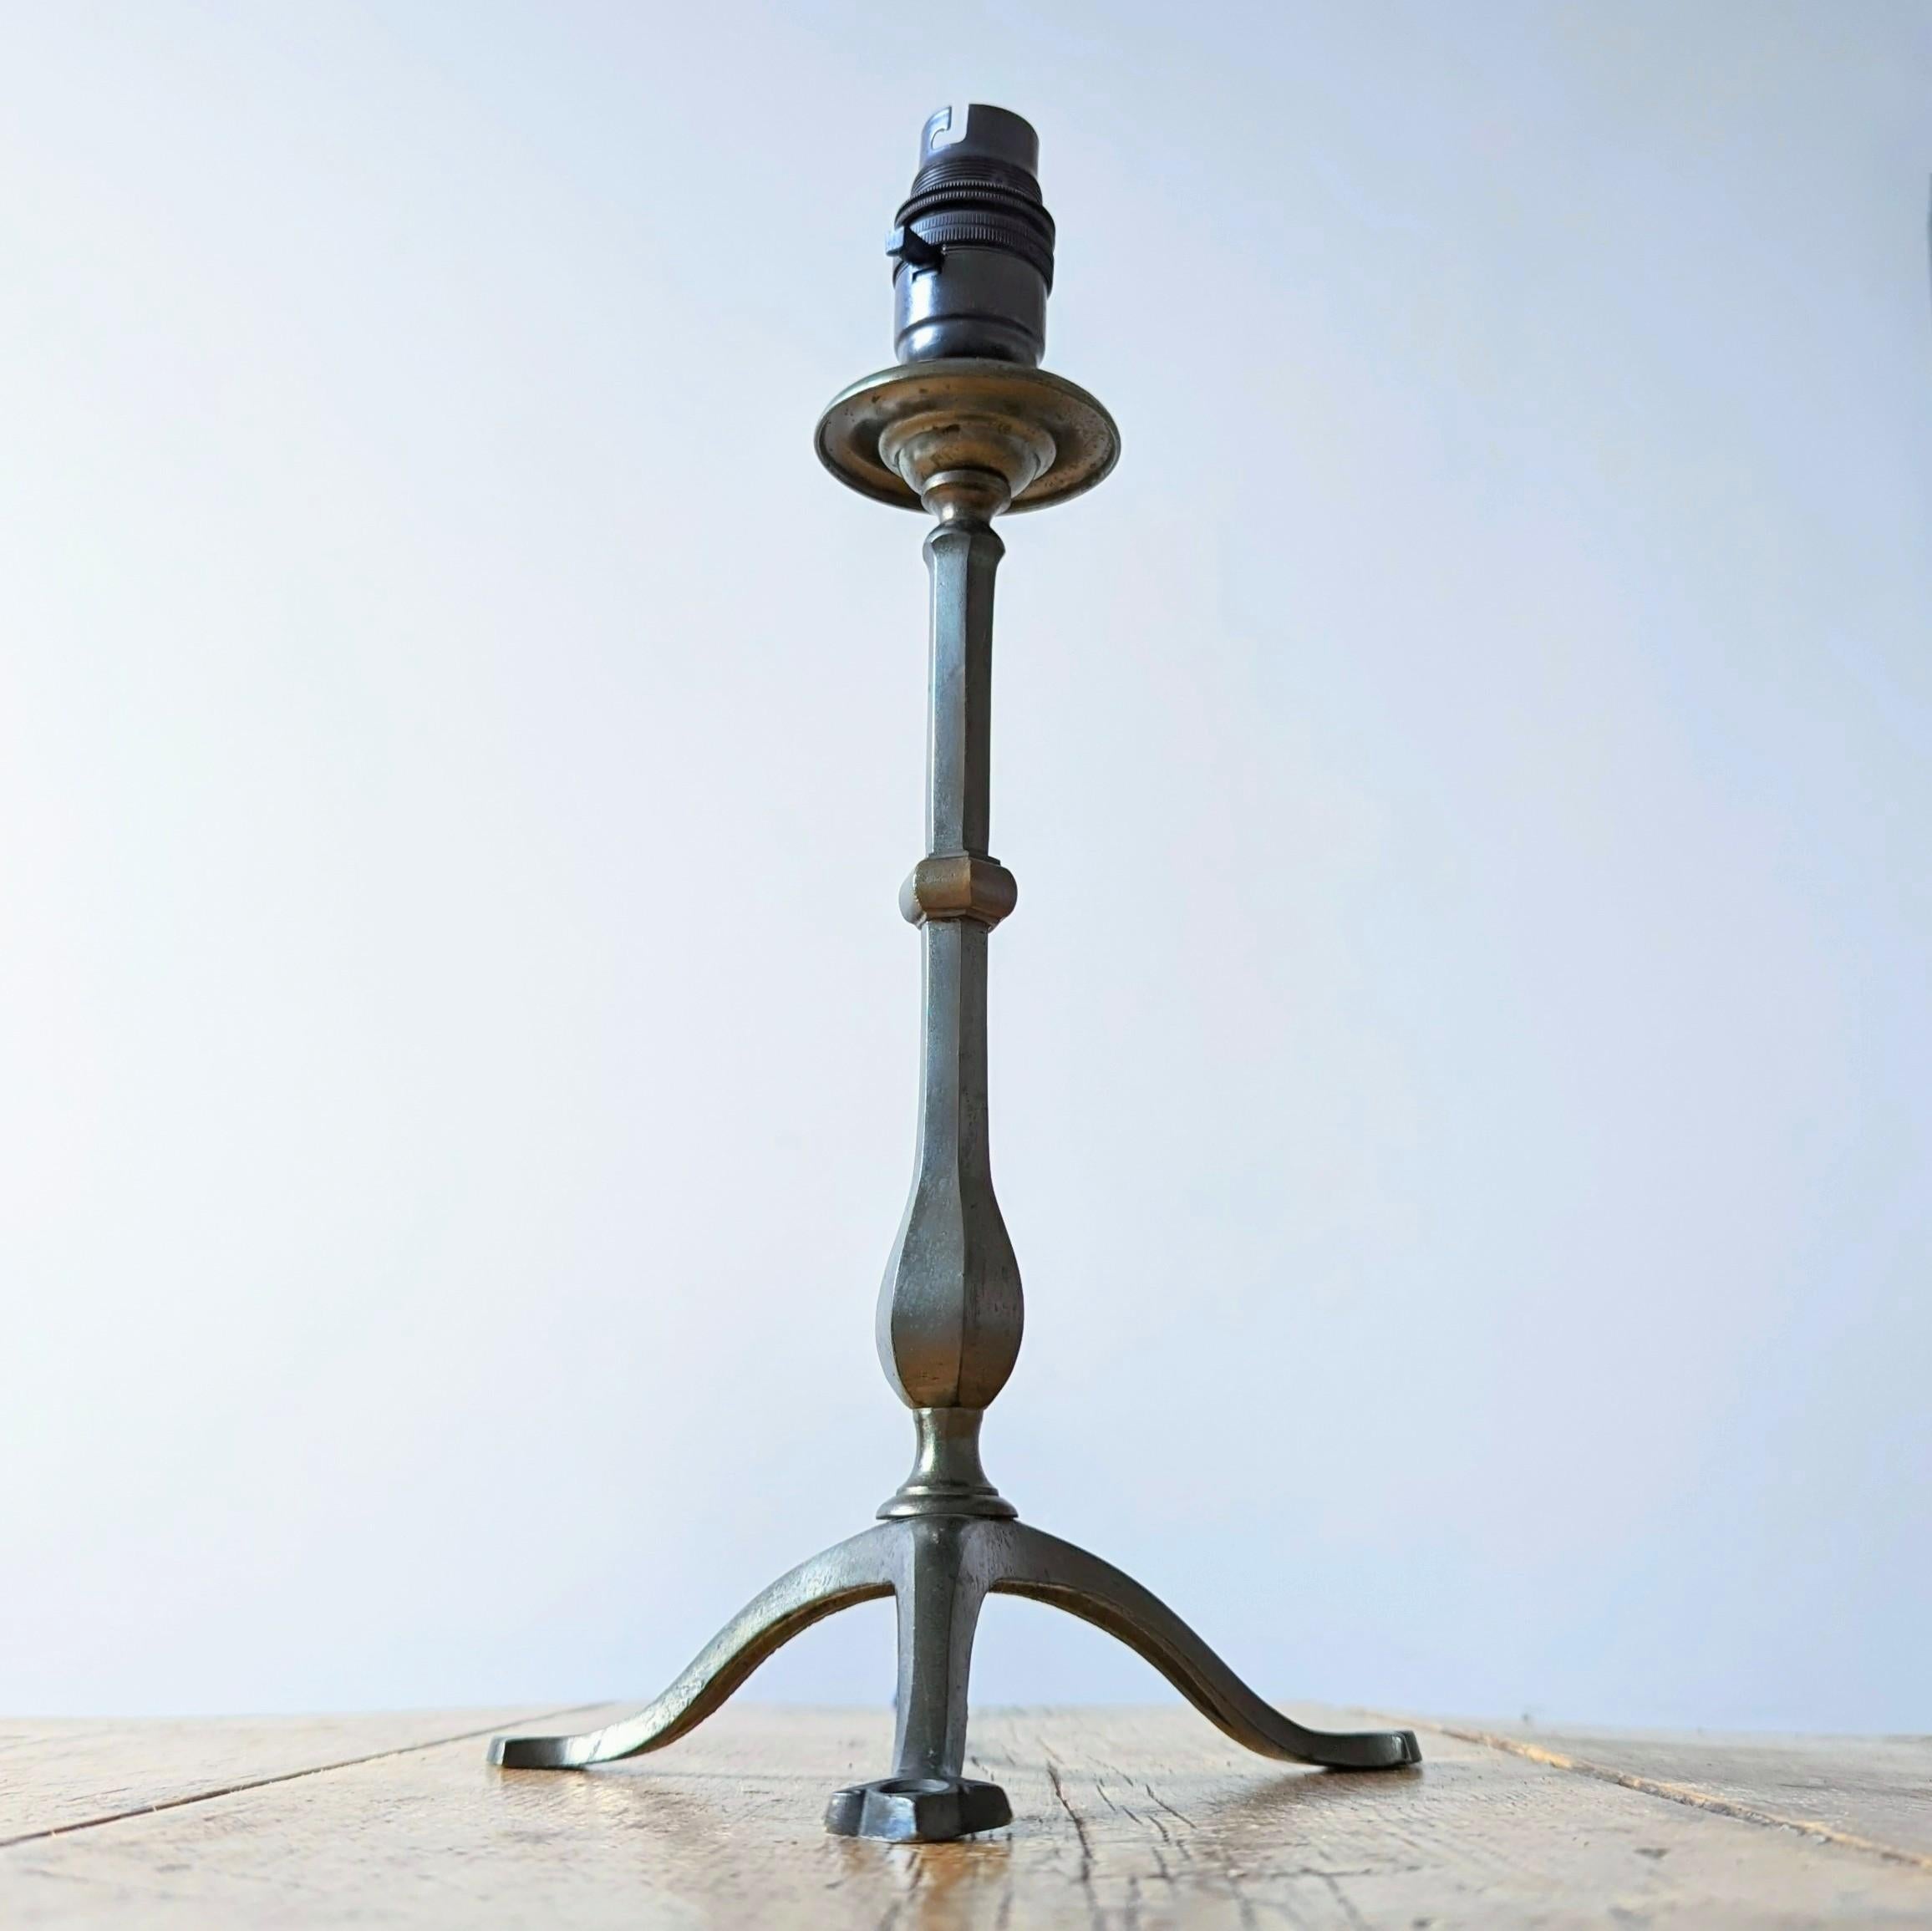 A smart silver plated brass pullman lamp attributed to Faraday & Son.

The crisp hexagonal stem is raised on three shapely legs.

Original hole in leg designed for wall attachment.

Excellent color and form.

Stamp likely covered by later